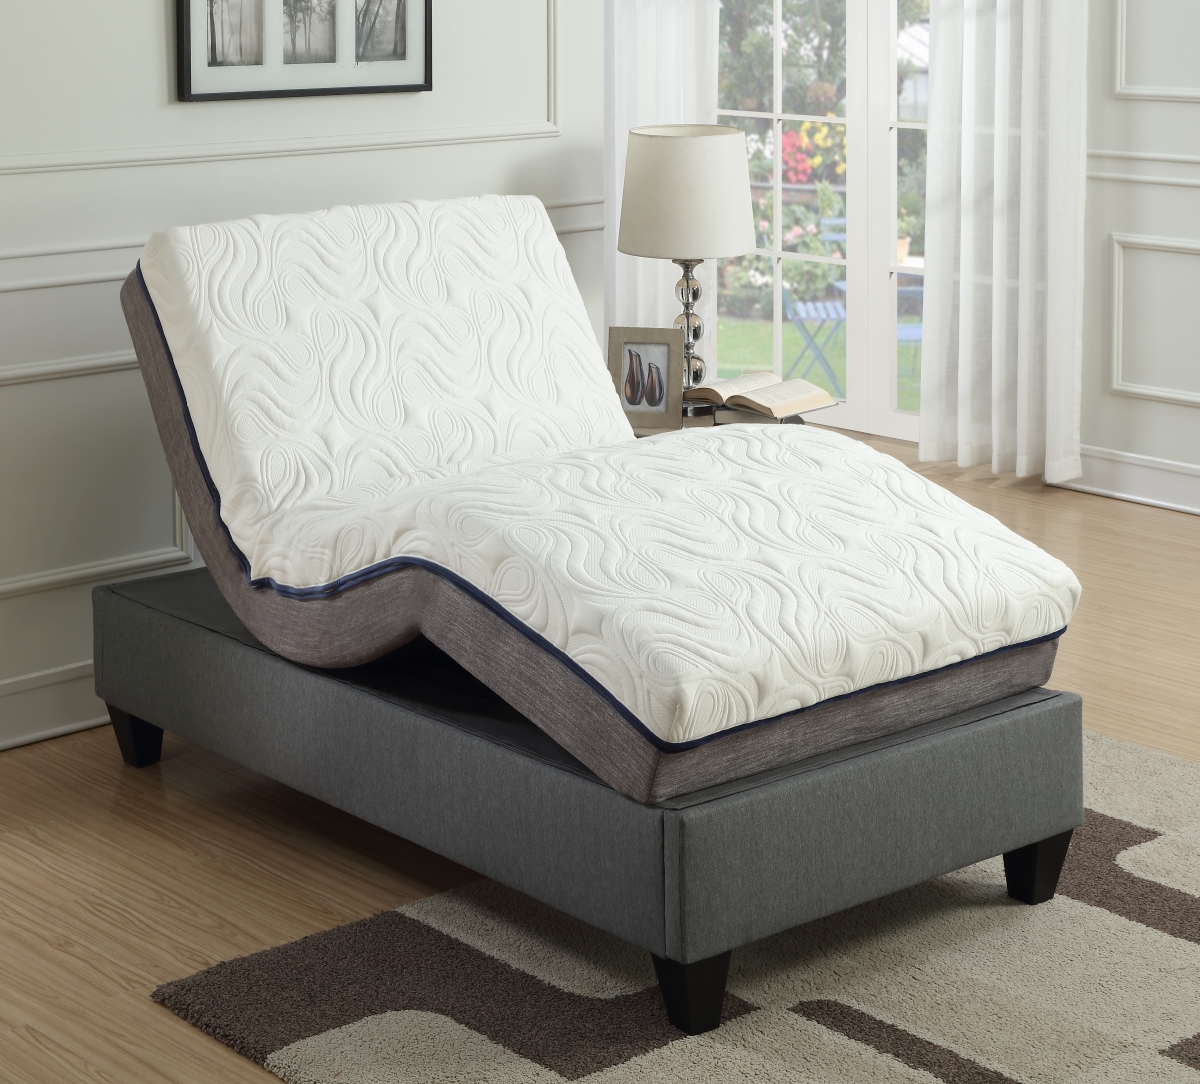 35482 Extra Large Groove Adjustable Mattress, White - Twin Size